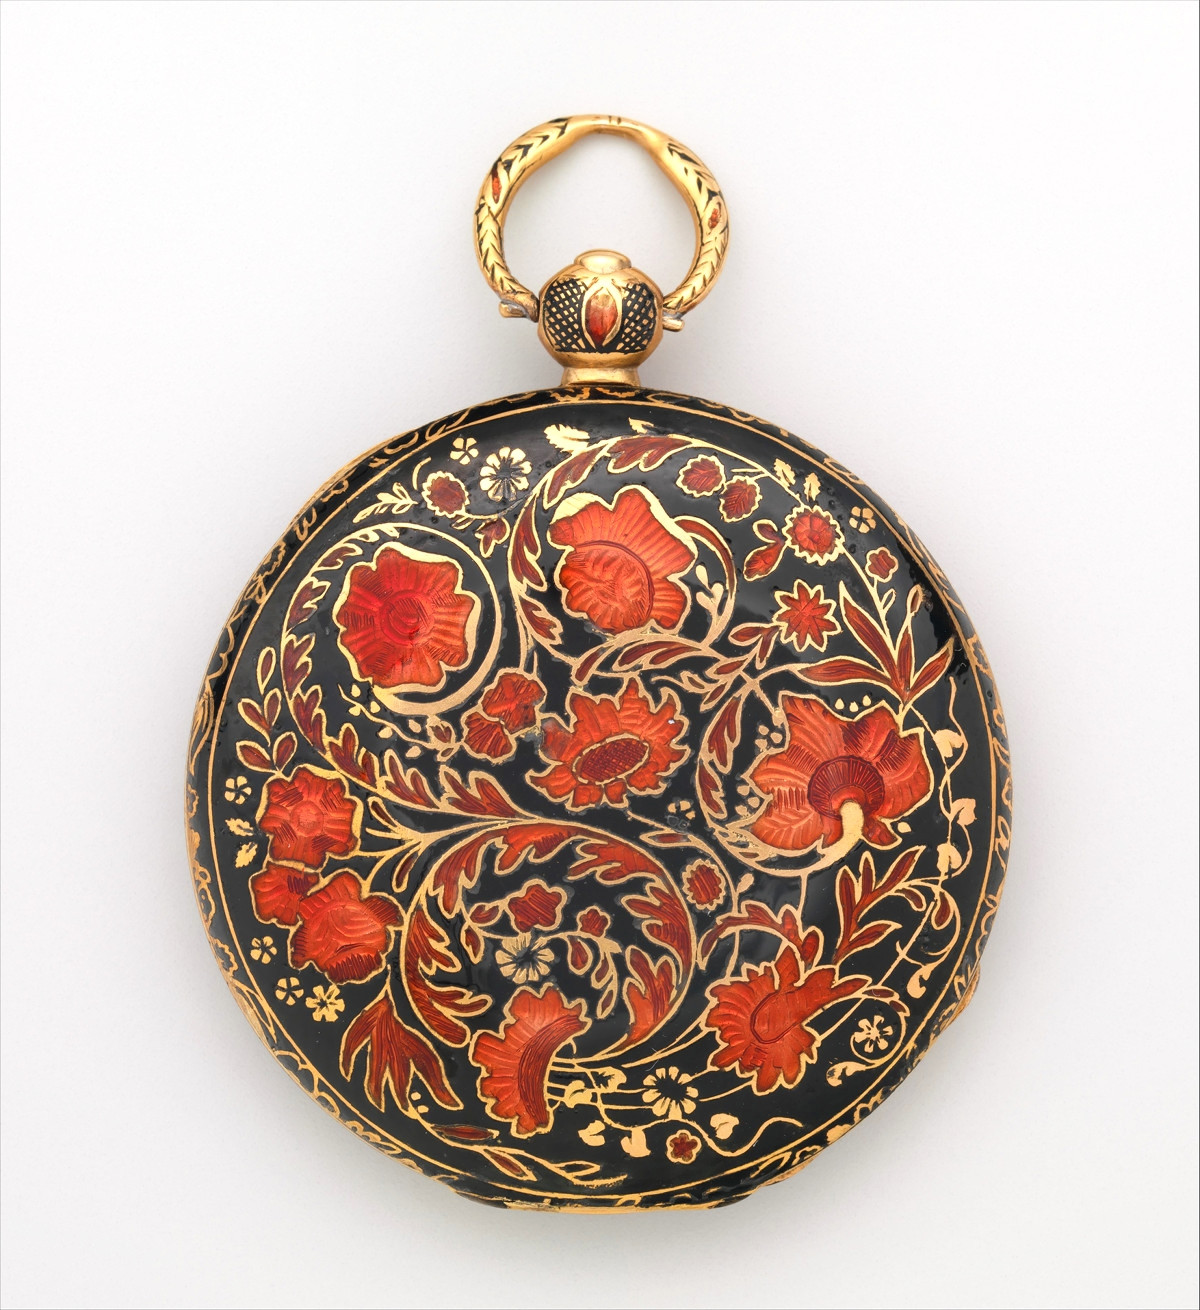 1830. Watch. Swiss, Geneva. Case of gold and enamel, with floral design; jeweled movement, with cylinder escapement. metmuseum